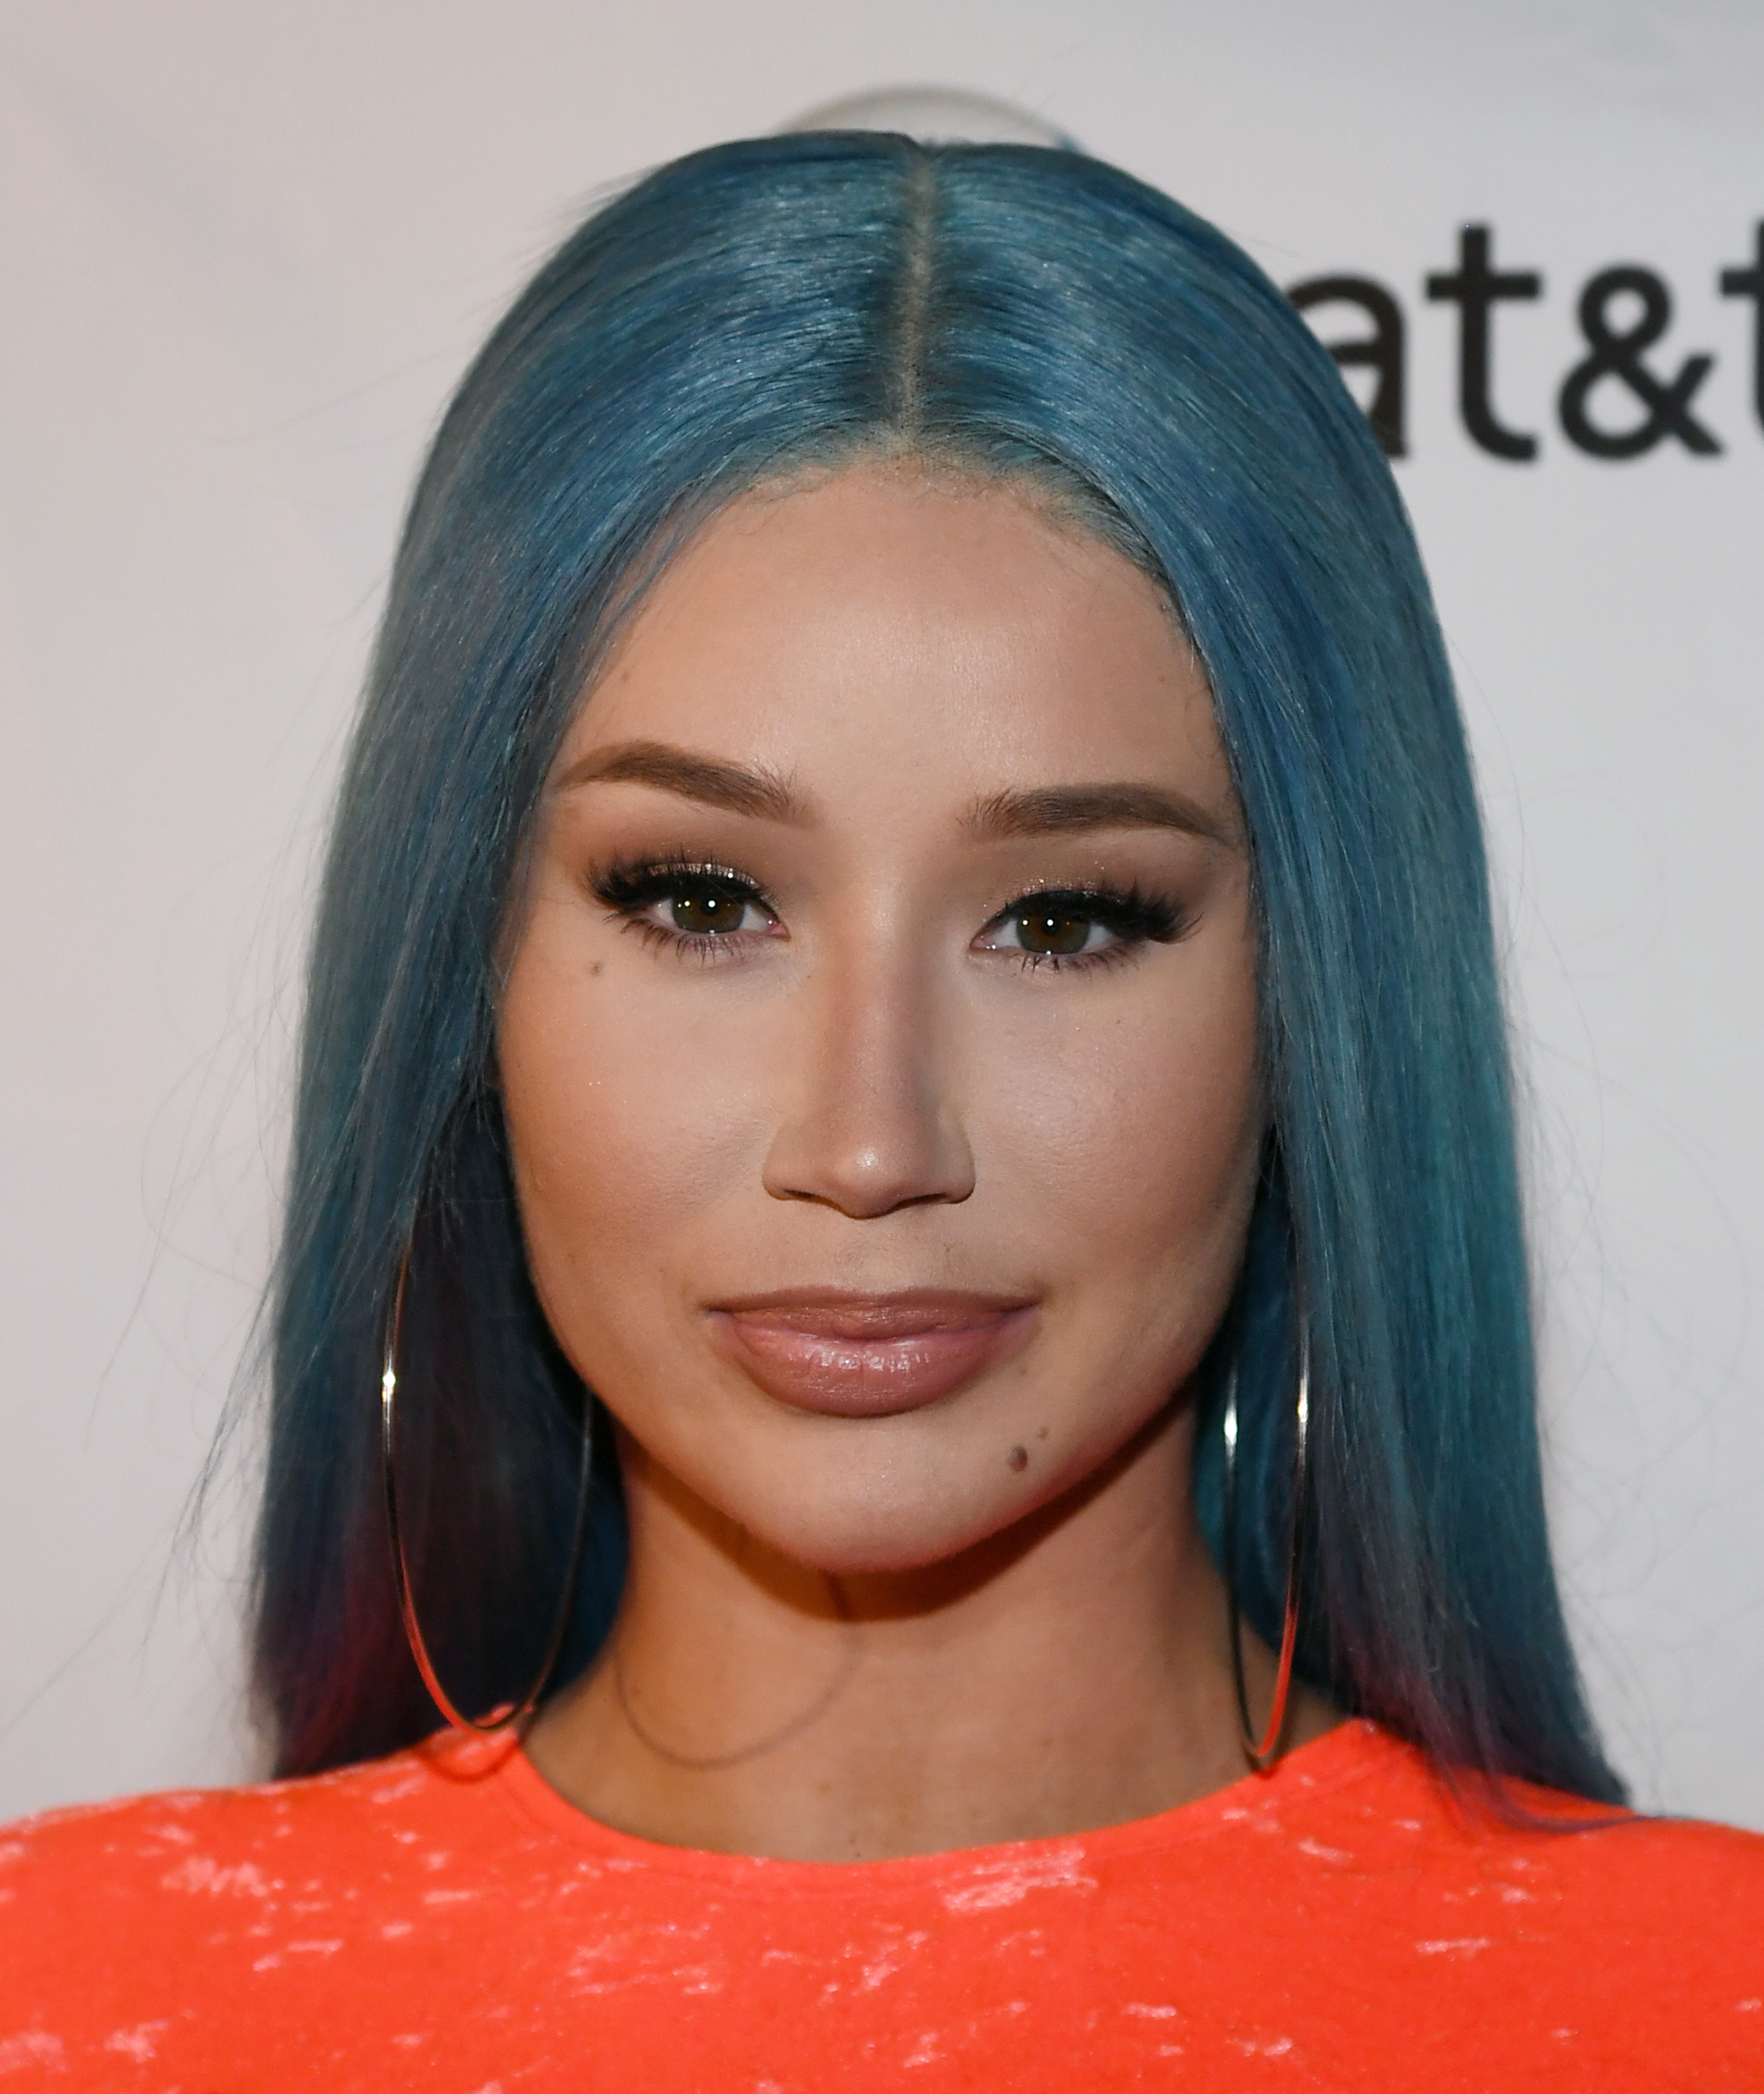 Iggy Azalea attends the WNBA All-Star Game 2019 beach concert on July 26, 2019, in Las Vegas, Nevada. | Source: Getty Images